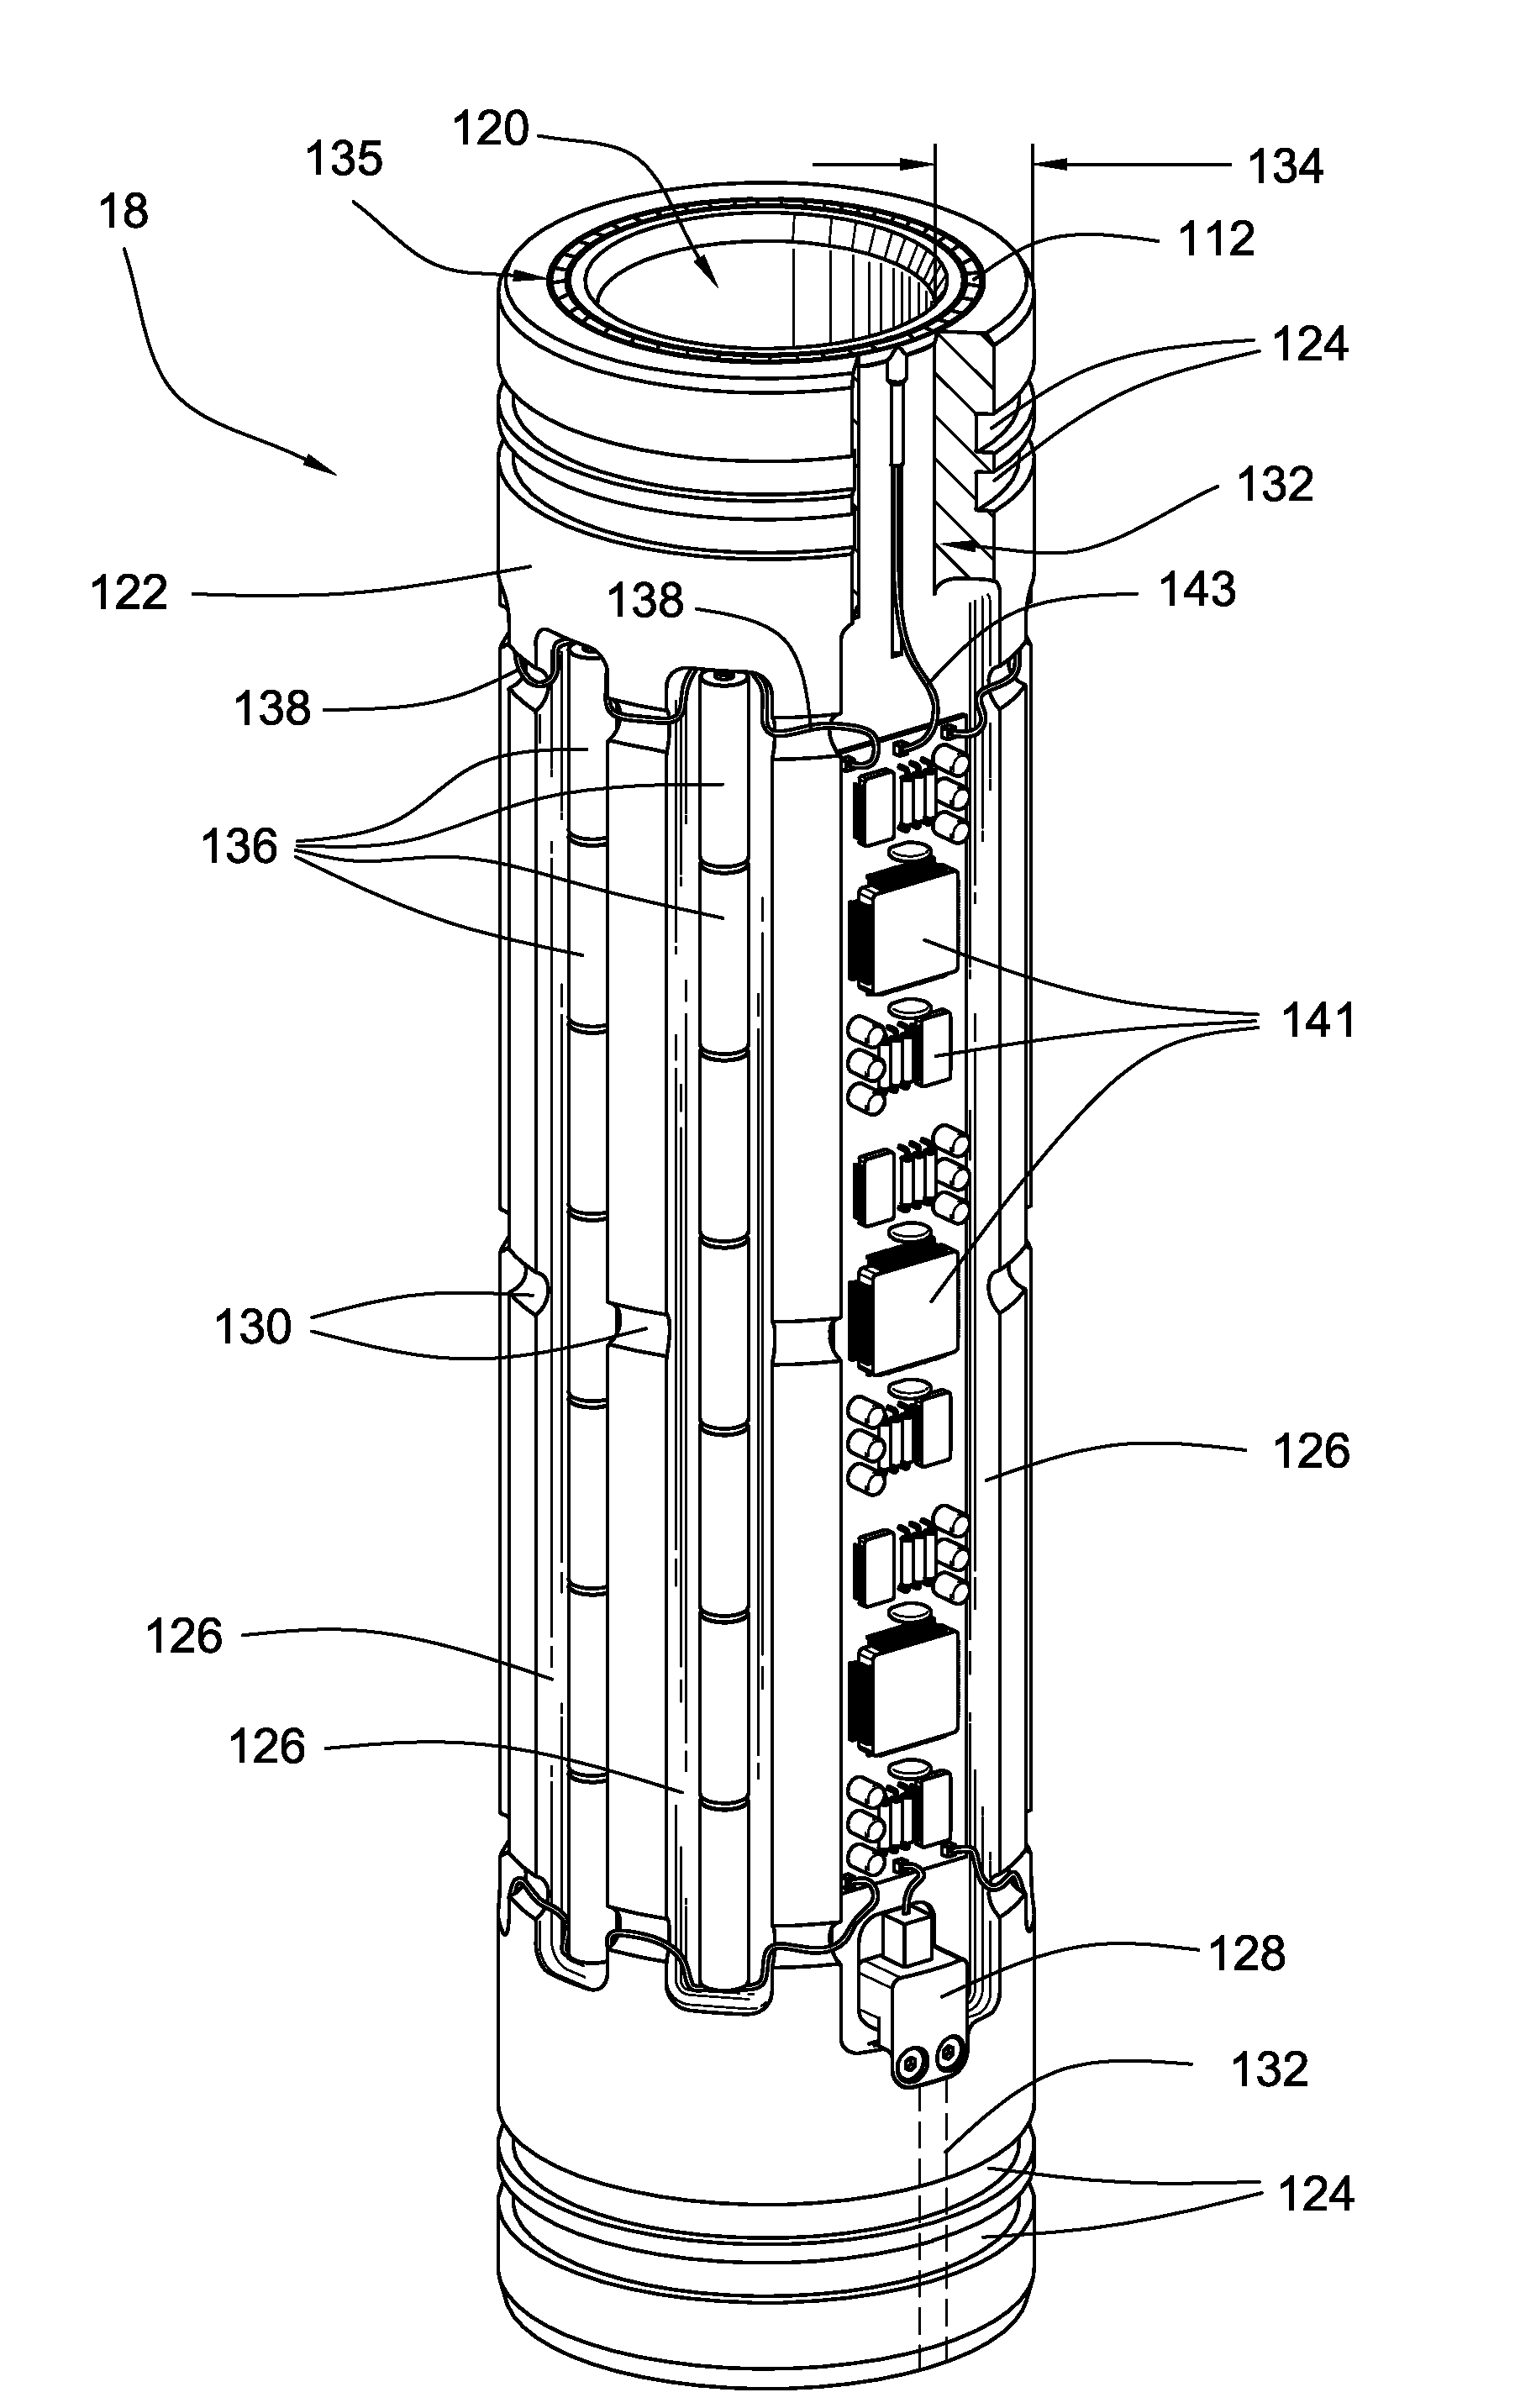 Method and system for cooling electrical components downhole